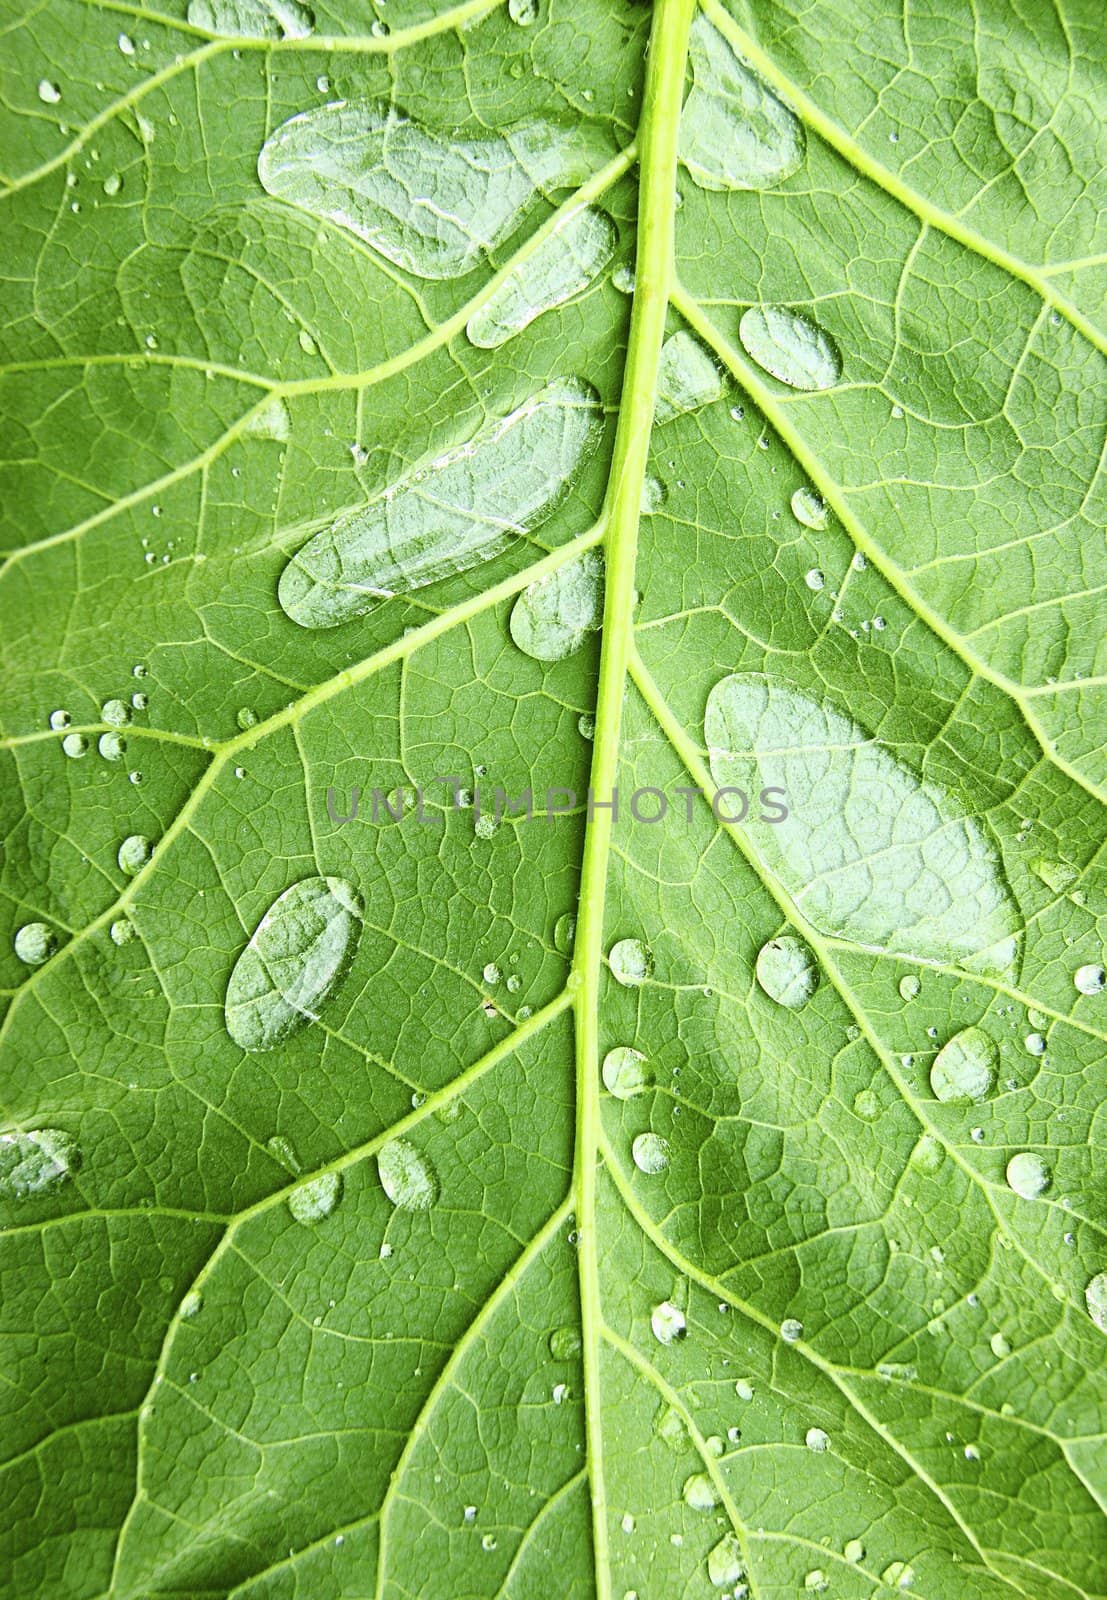 Sheet of the plant with drop of water on him